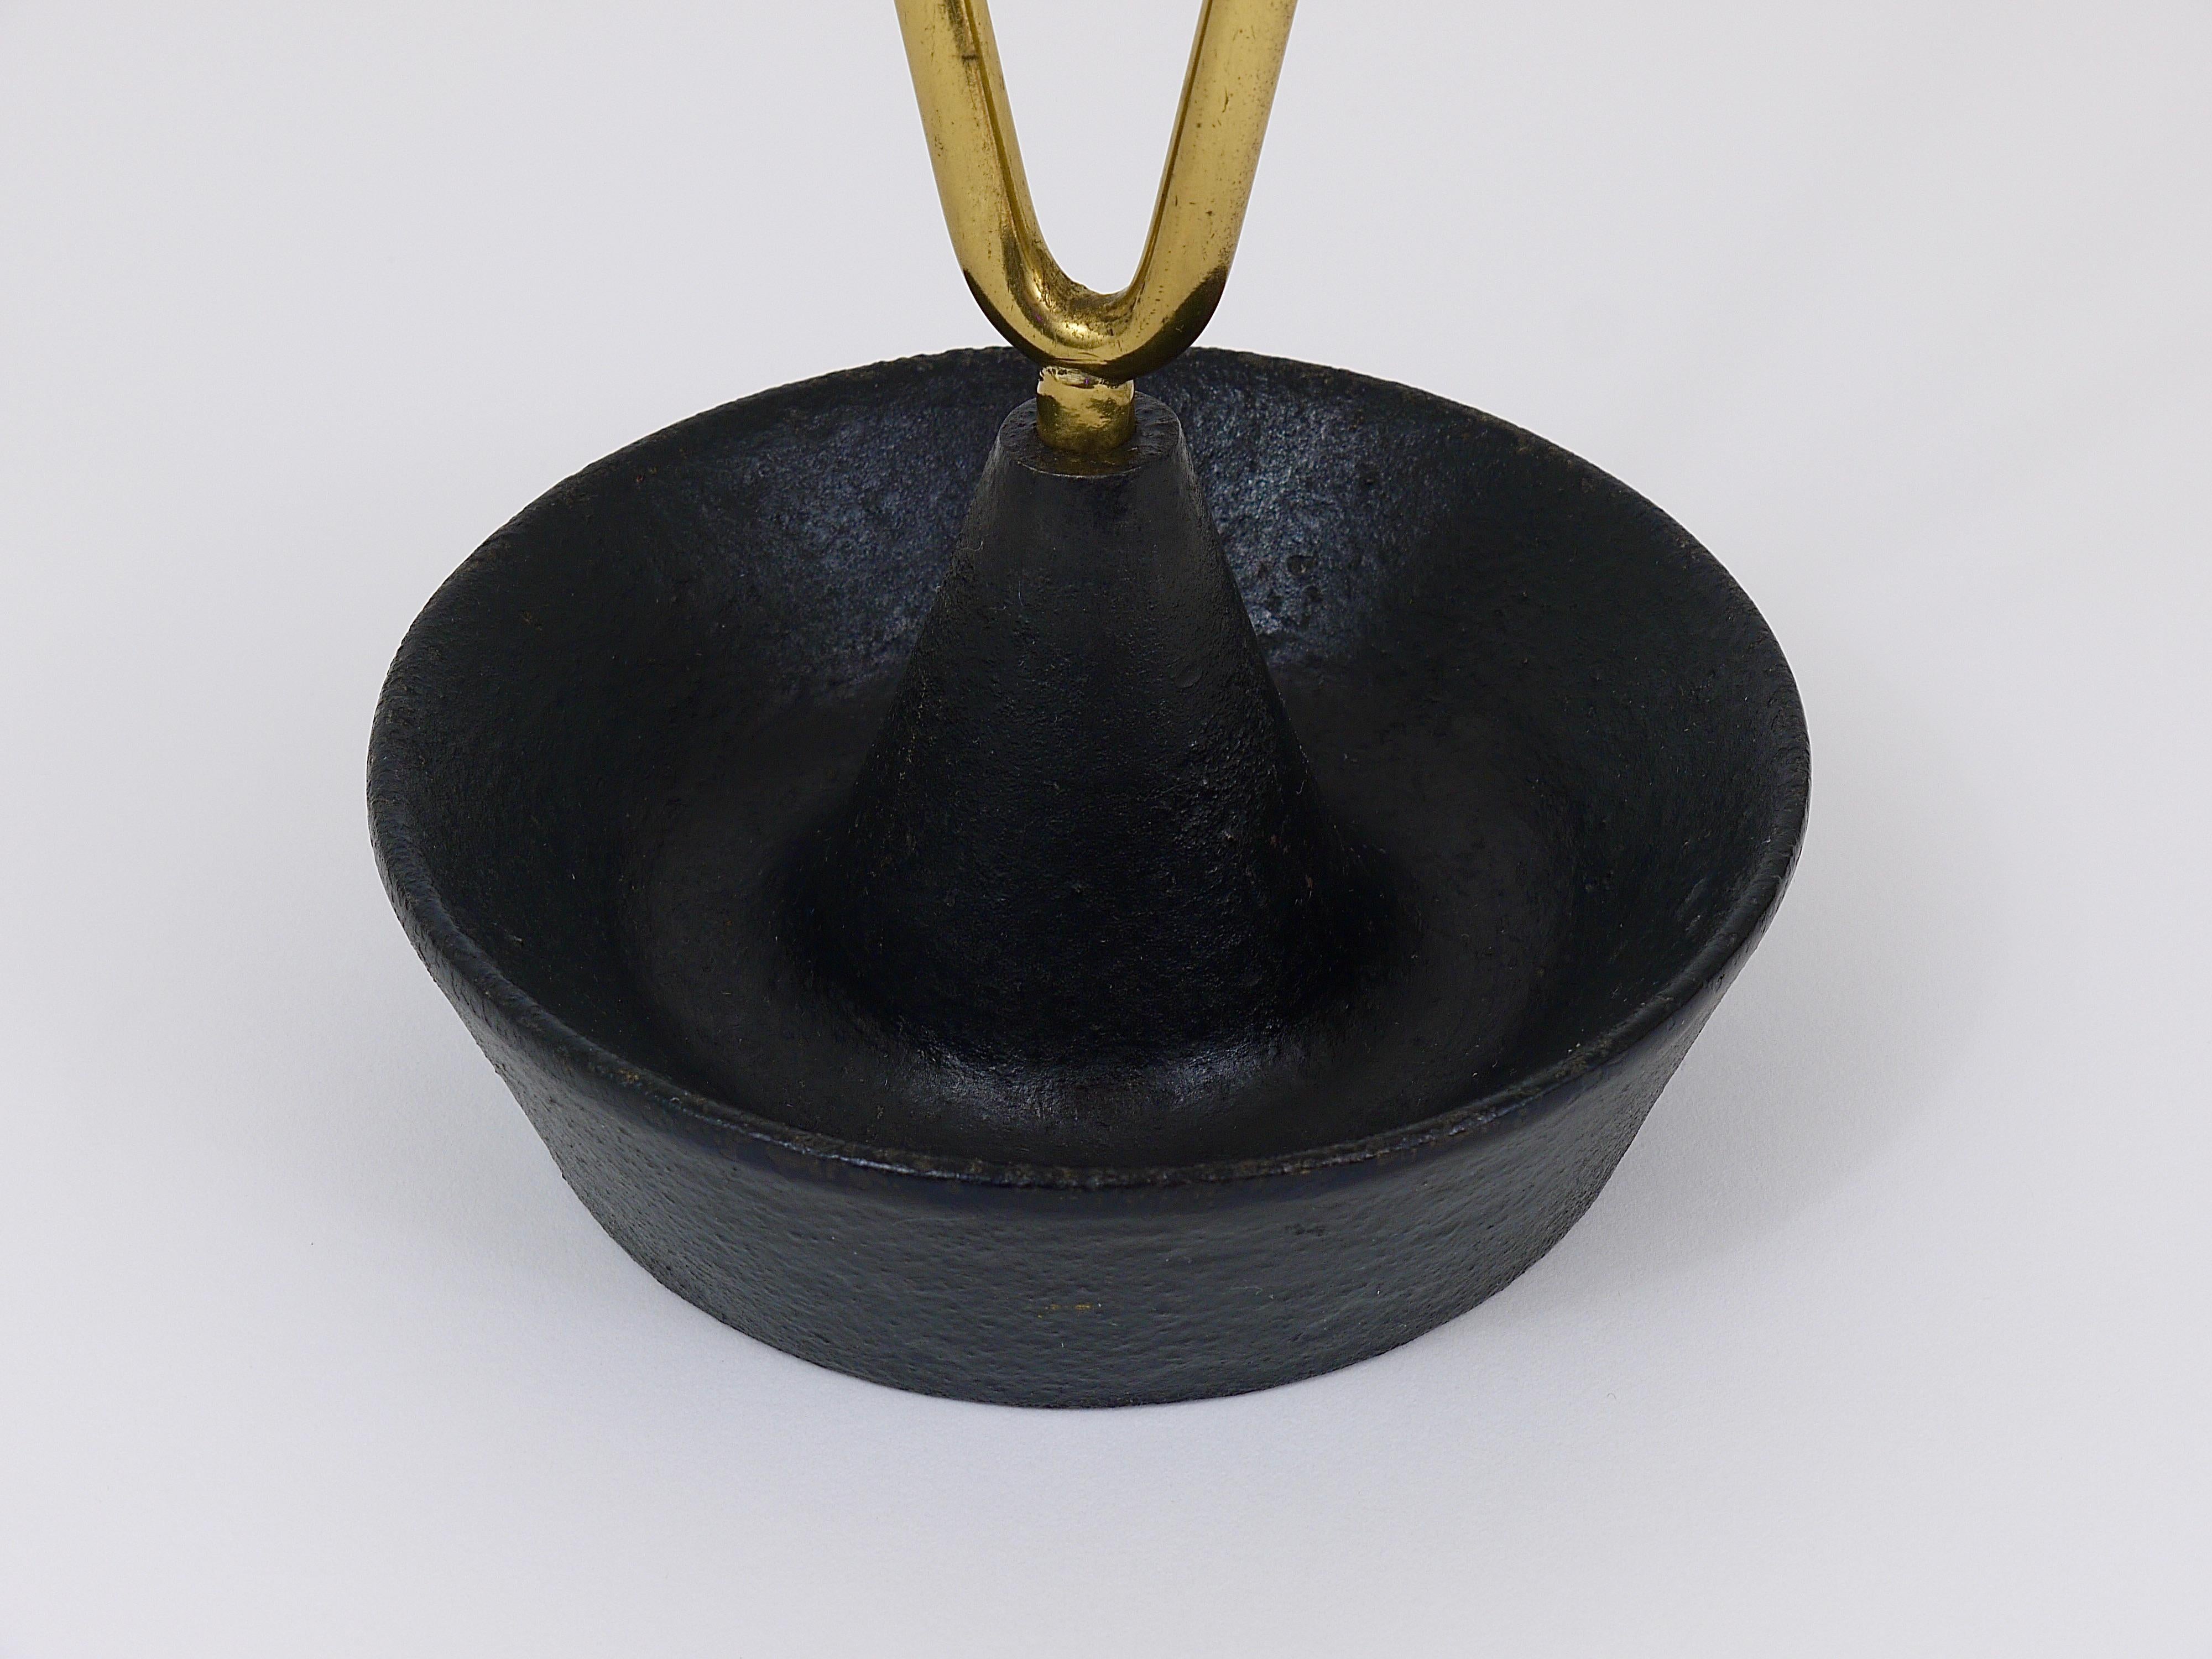 A straight and beautiful Austrian modernist umbrella stand, made of brass and cast iron. Designed and executed by Carl Auböck. A sophisticated piece, one of the most beautiful umbrella stands we know. In very good original condition with marginal